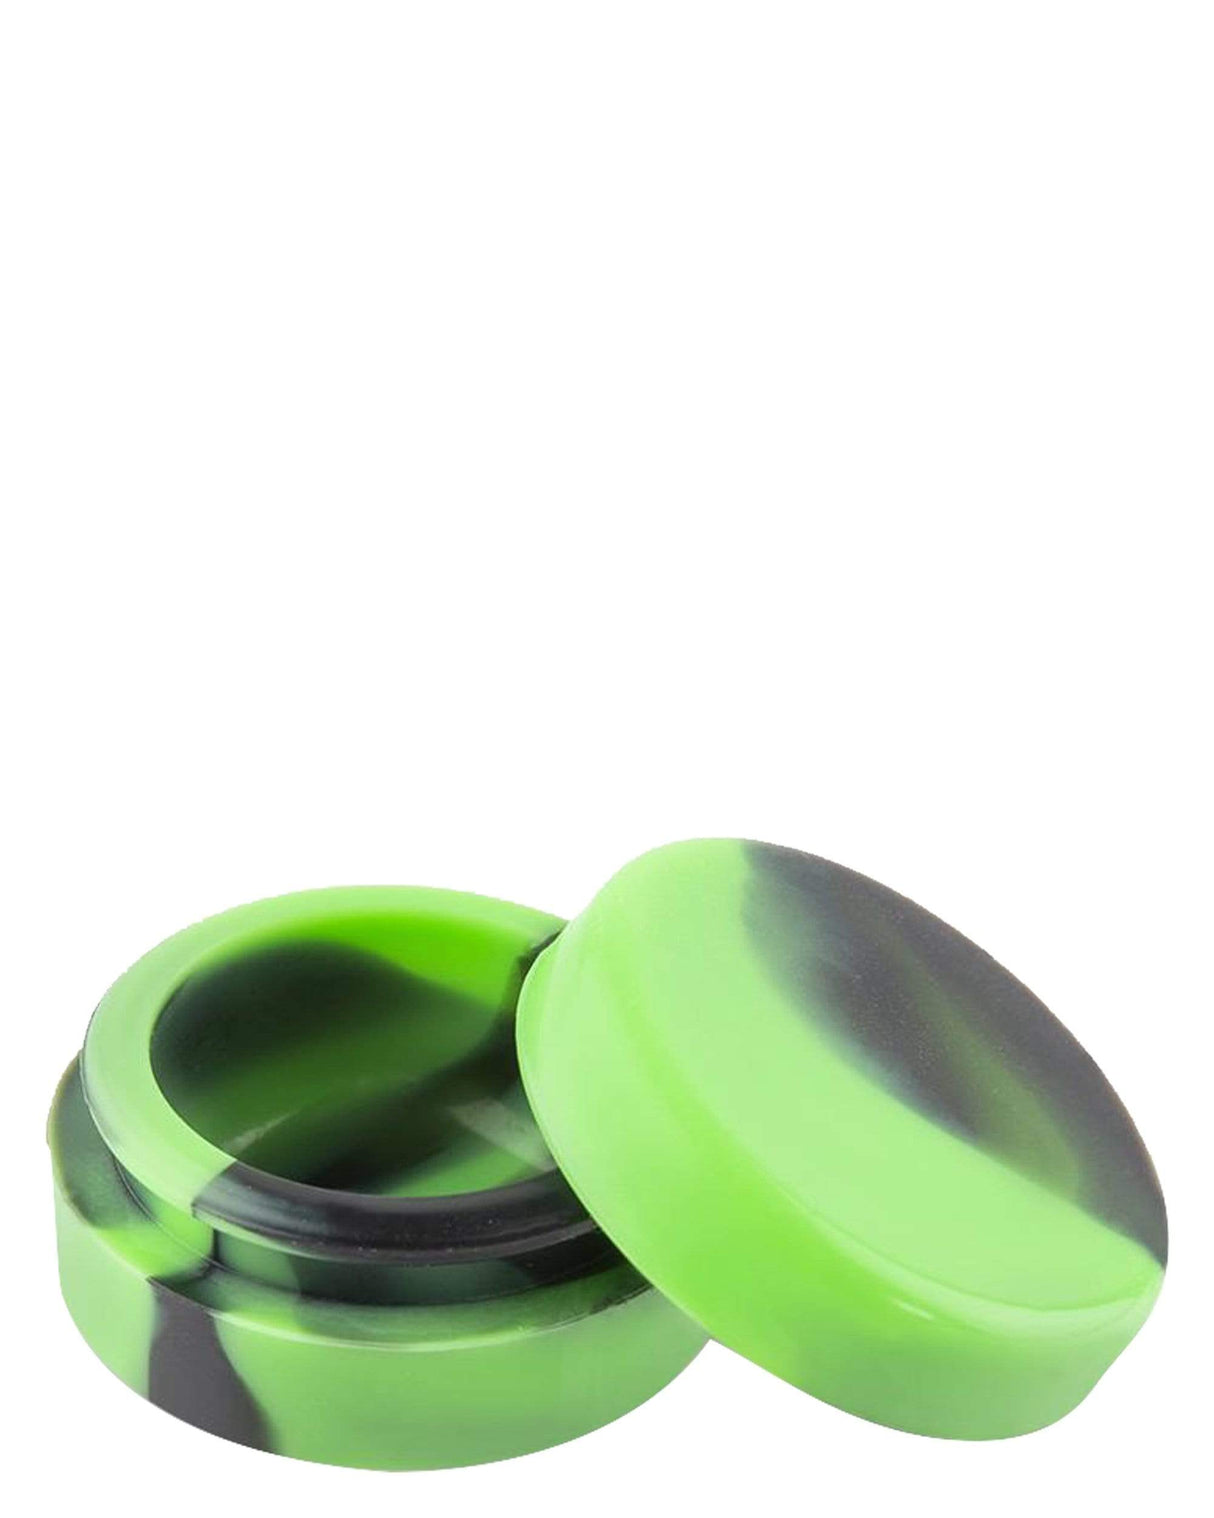 Ooze Silicone Stash Jar in Green and Black Swirl Design, Compact and Airtight